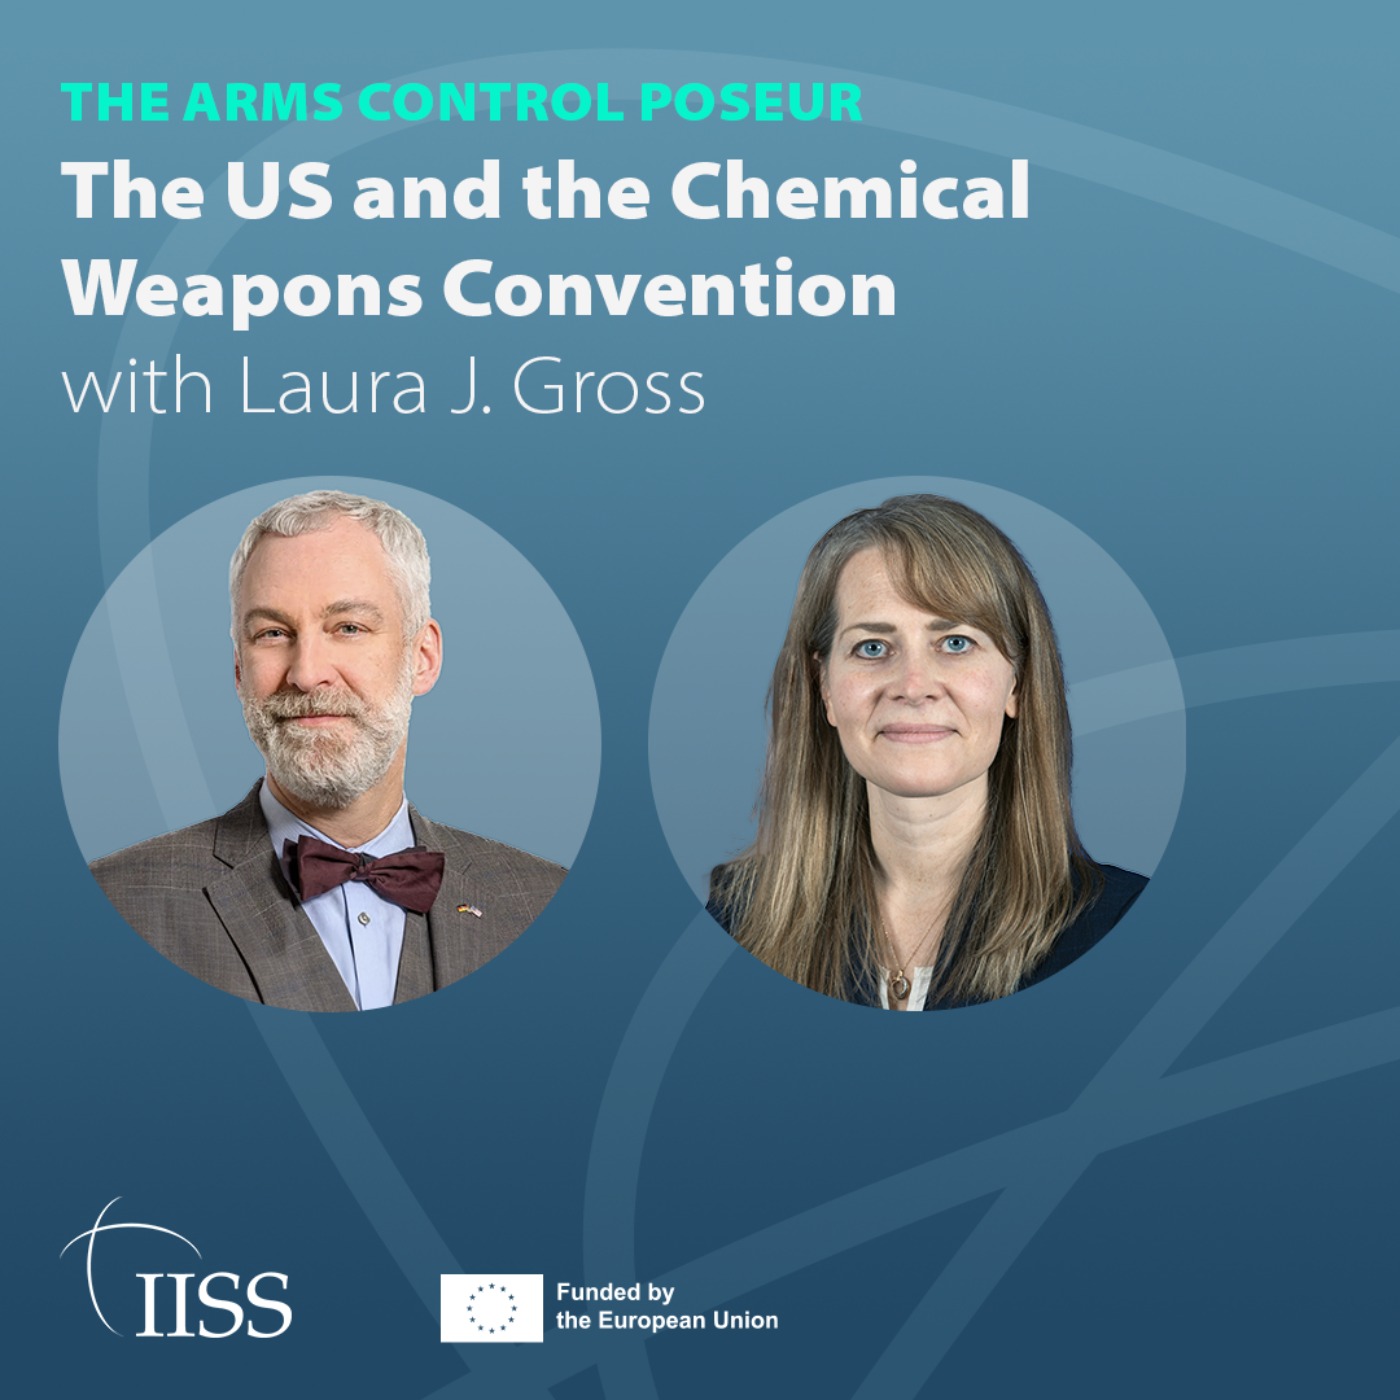 The US and the Chemical Weapons Convention with Laura J. Gross